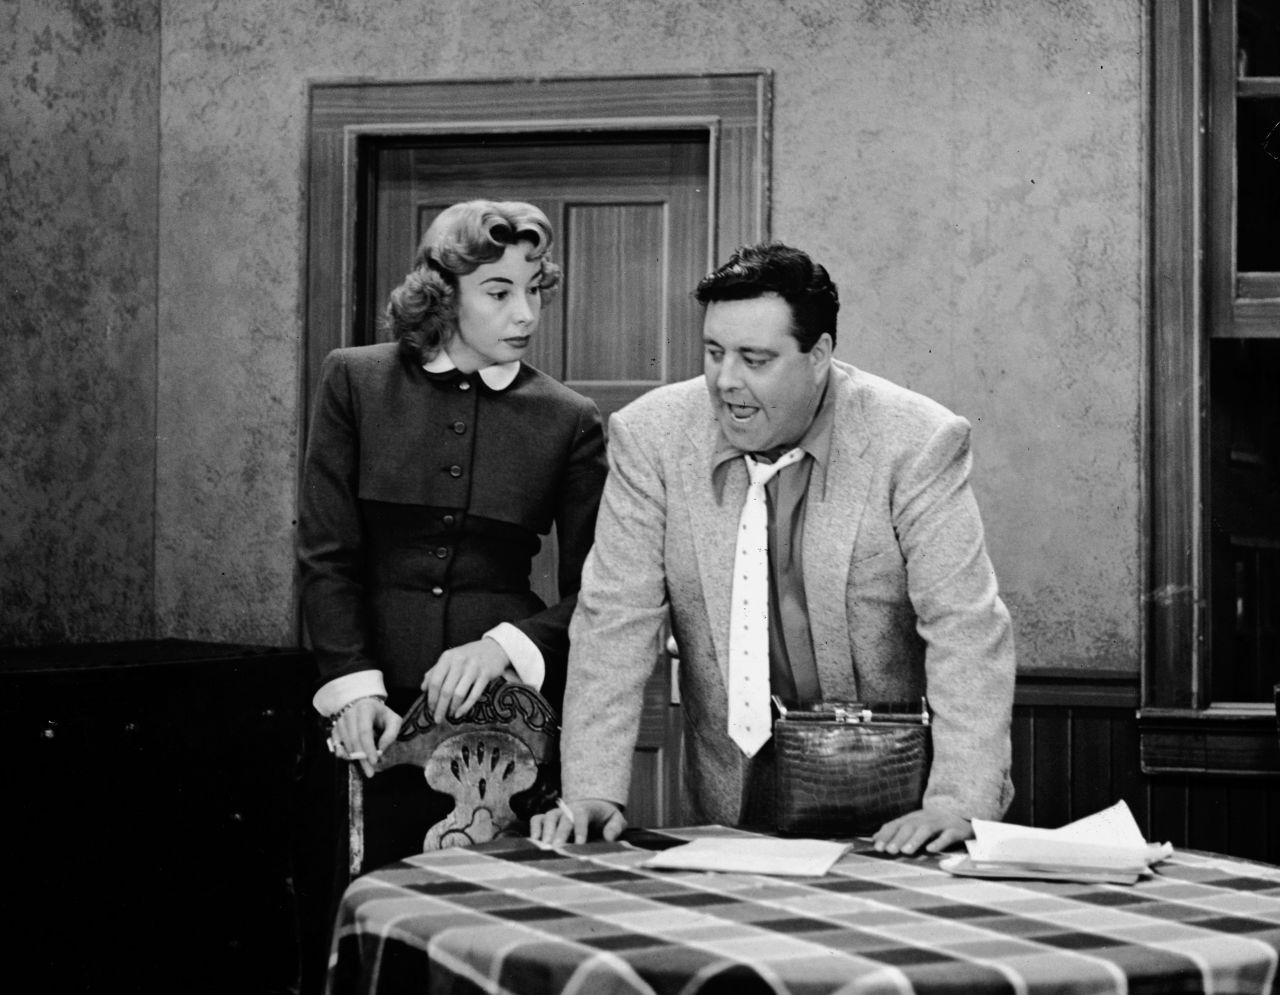 "Bang, zoom!" probably wouldn't fly these days on a TV sitcom, but audiences loved watching Jackie Gleason and Audrey Meadows spar (every bickering TV couple owes them a debt of gratitude), and they were reassured when so many episodes ended with Ralph telling Alice, "Baby, you're the greatest."